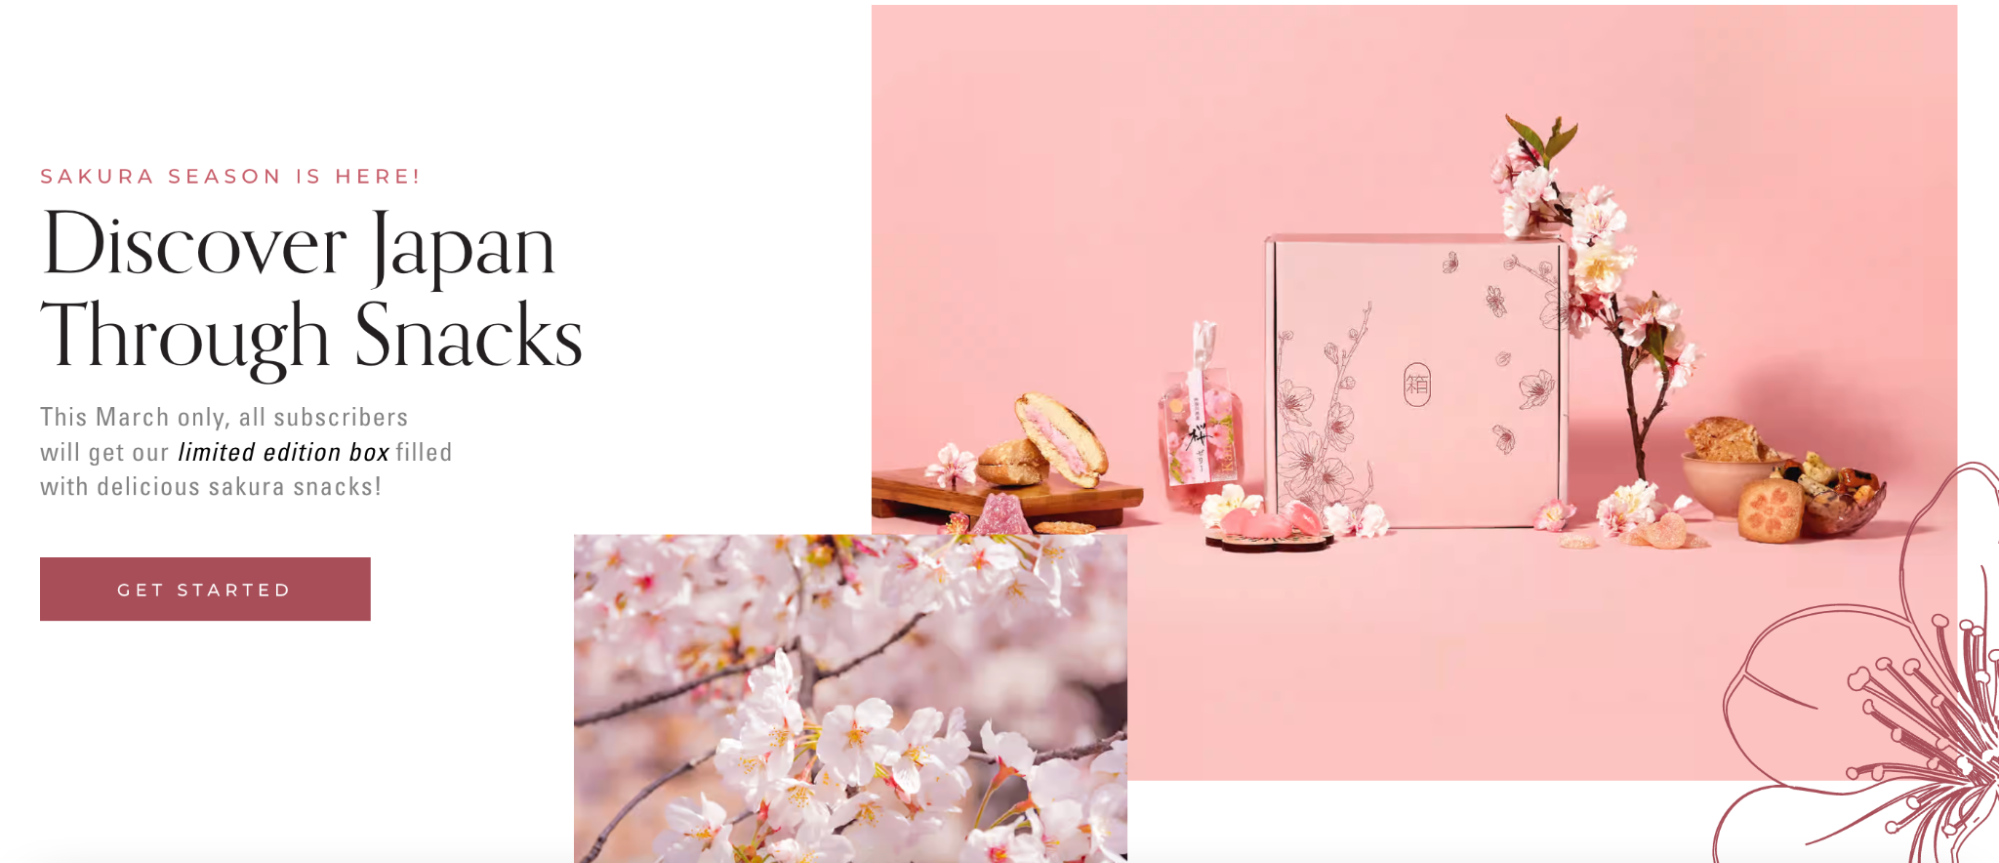 A screenshot from Bokksu's website, with an image on the right of a pink box against a pink background, with cherry blossom details layered above and text on the left.